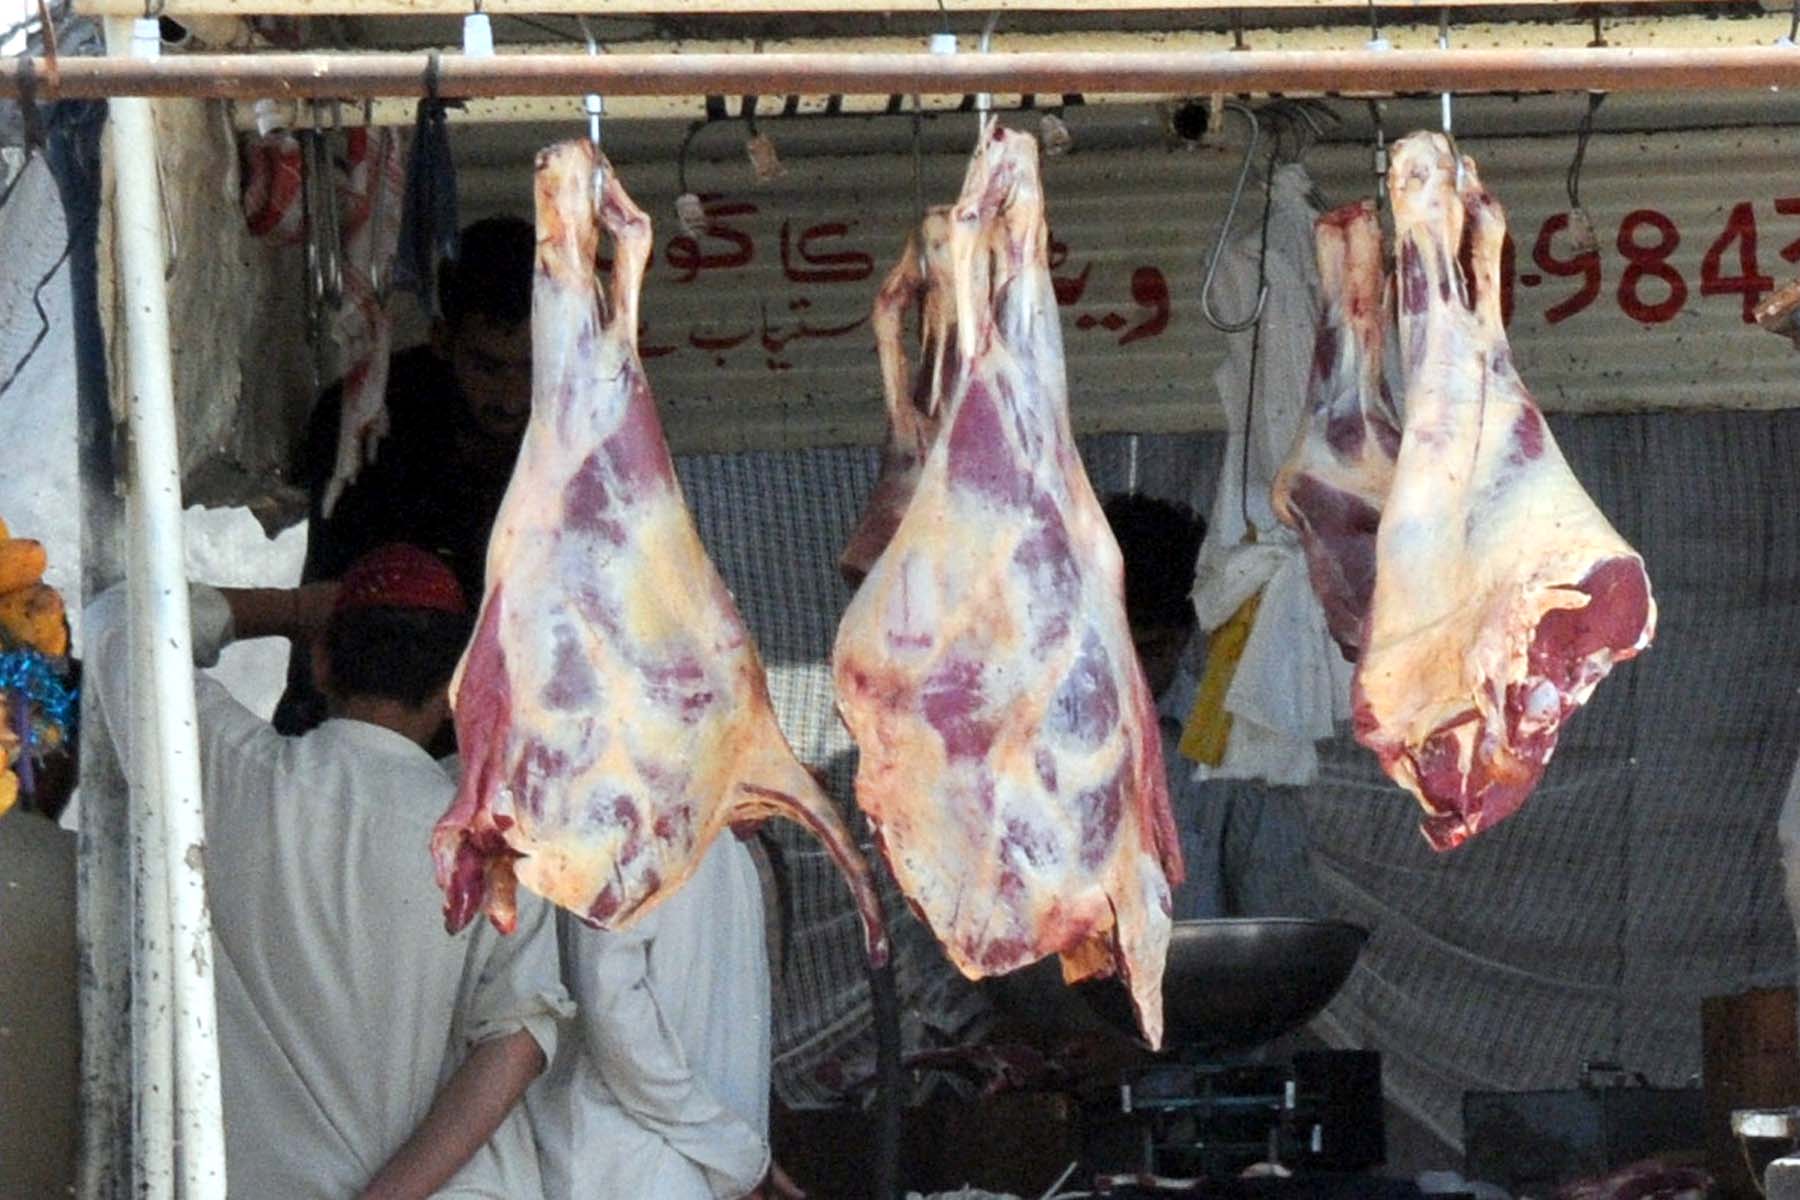 butchers of kohat told to ensure cleanliness